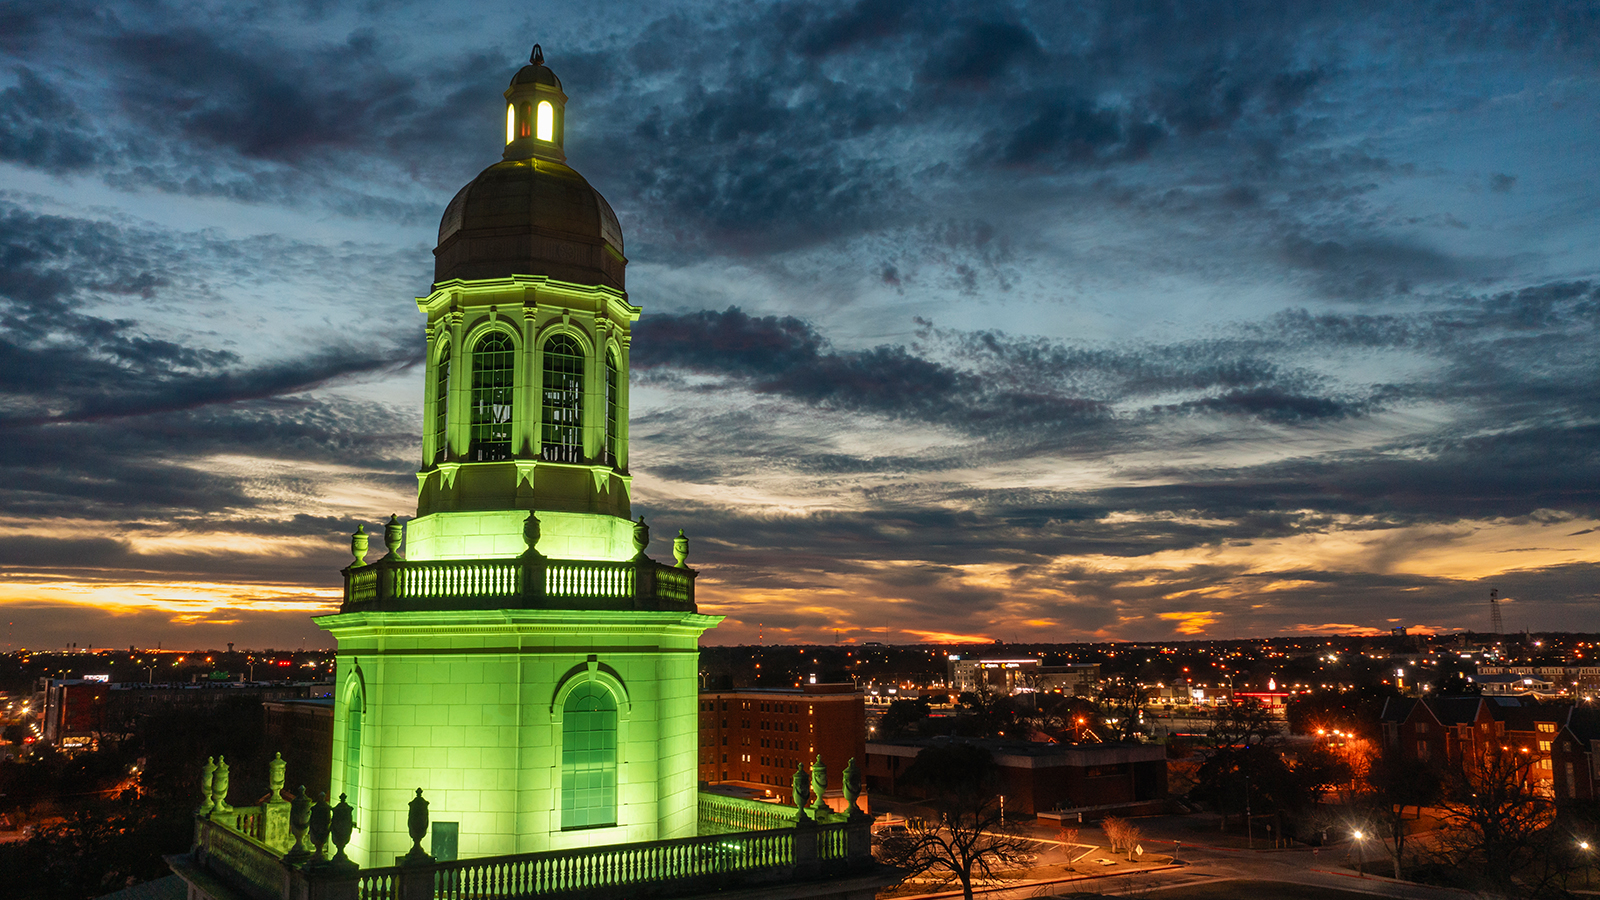 Baylor University's Pat Neff Hall is lit up green, with sunset in background.